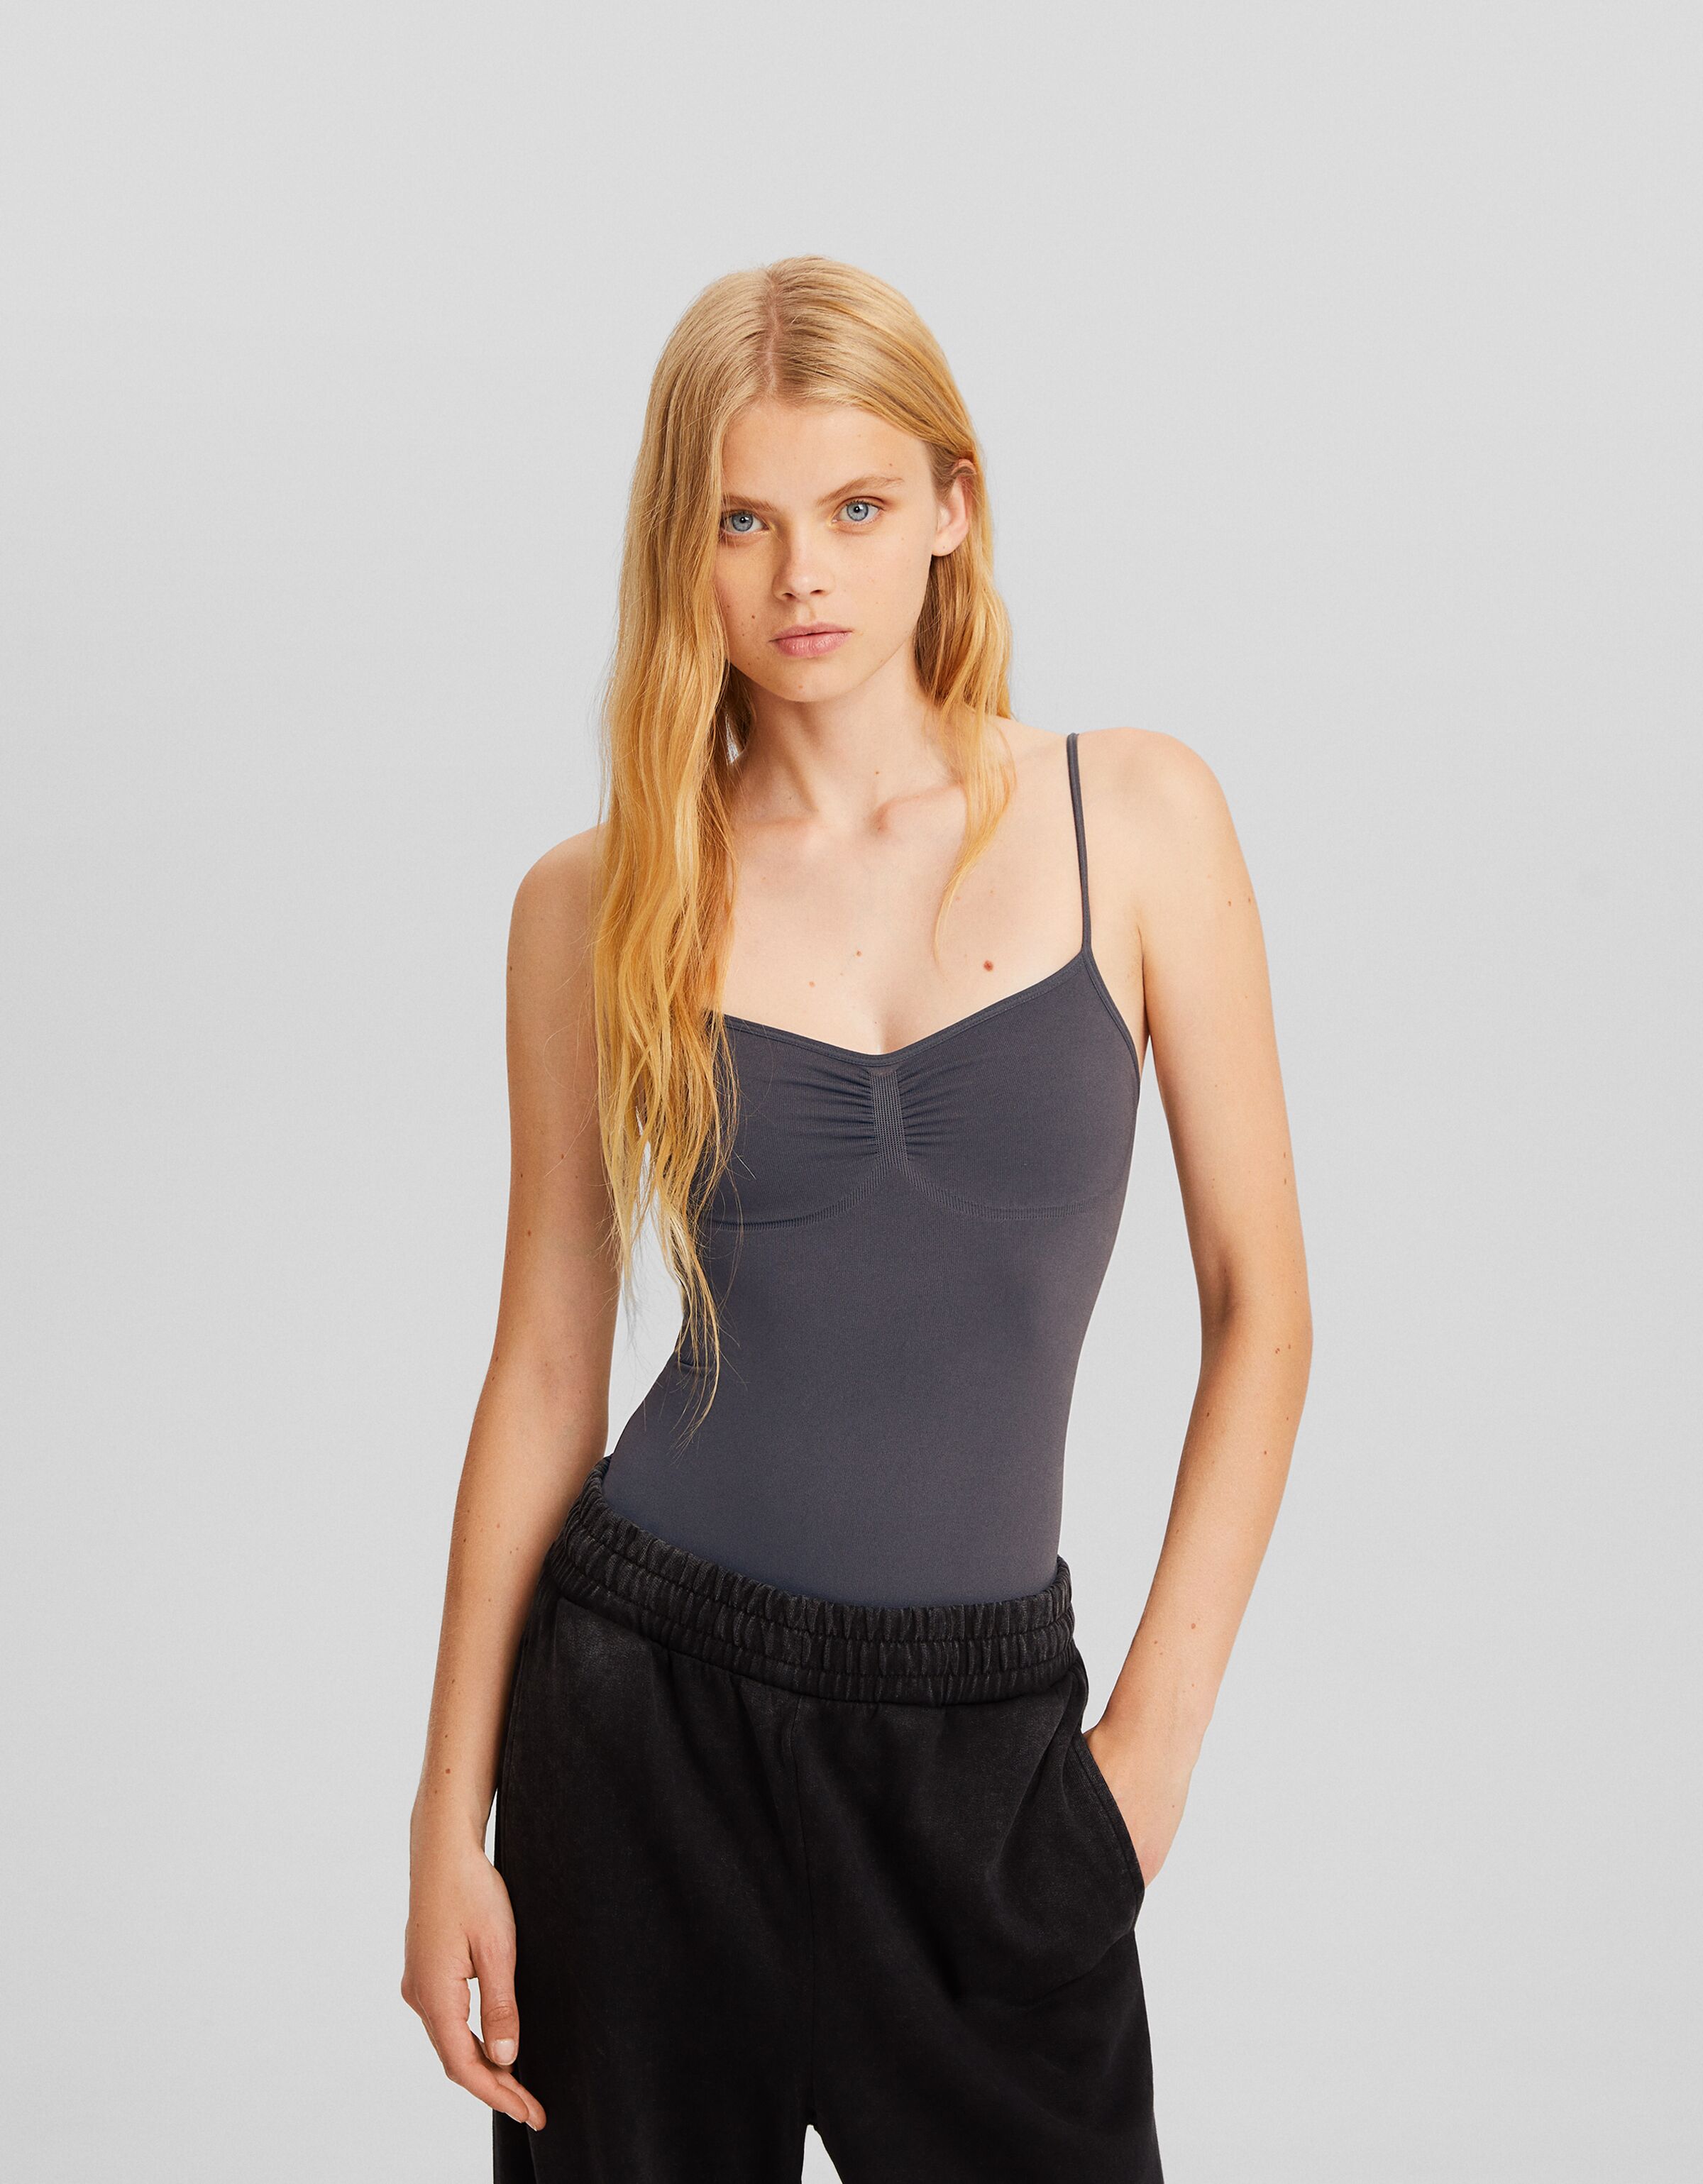 Strappy bodysuit with a gathered front - Bodysuits - BSK Teen